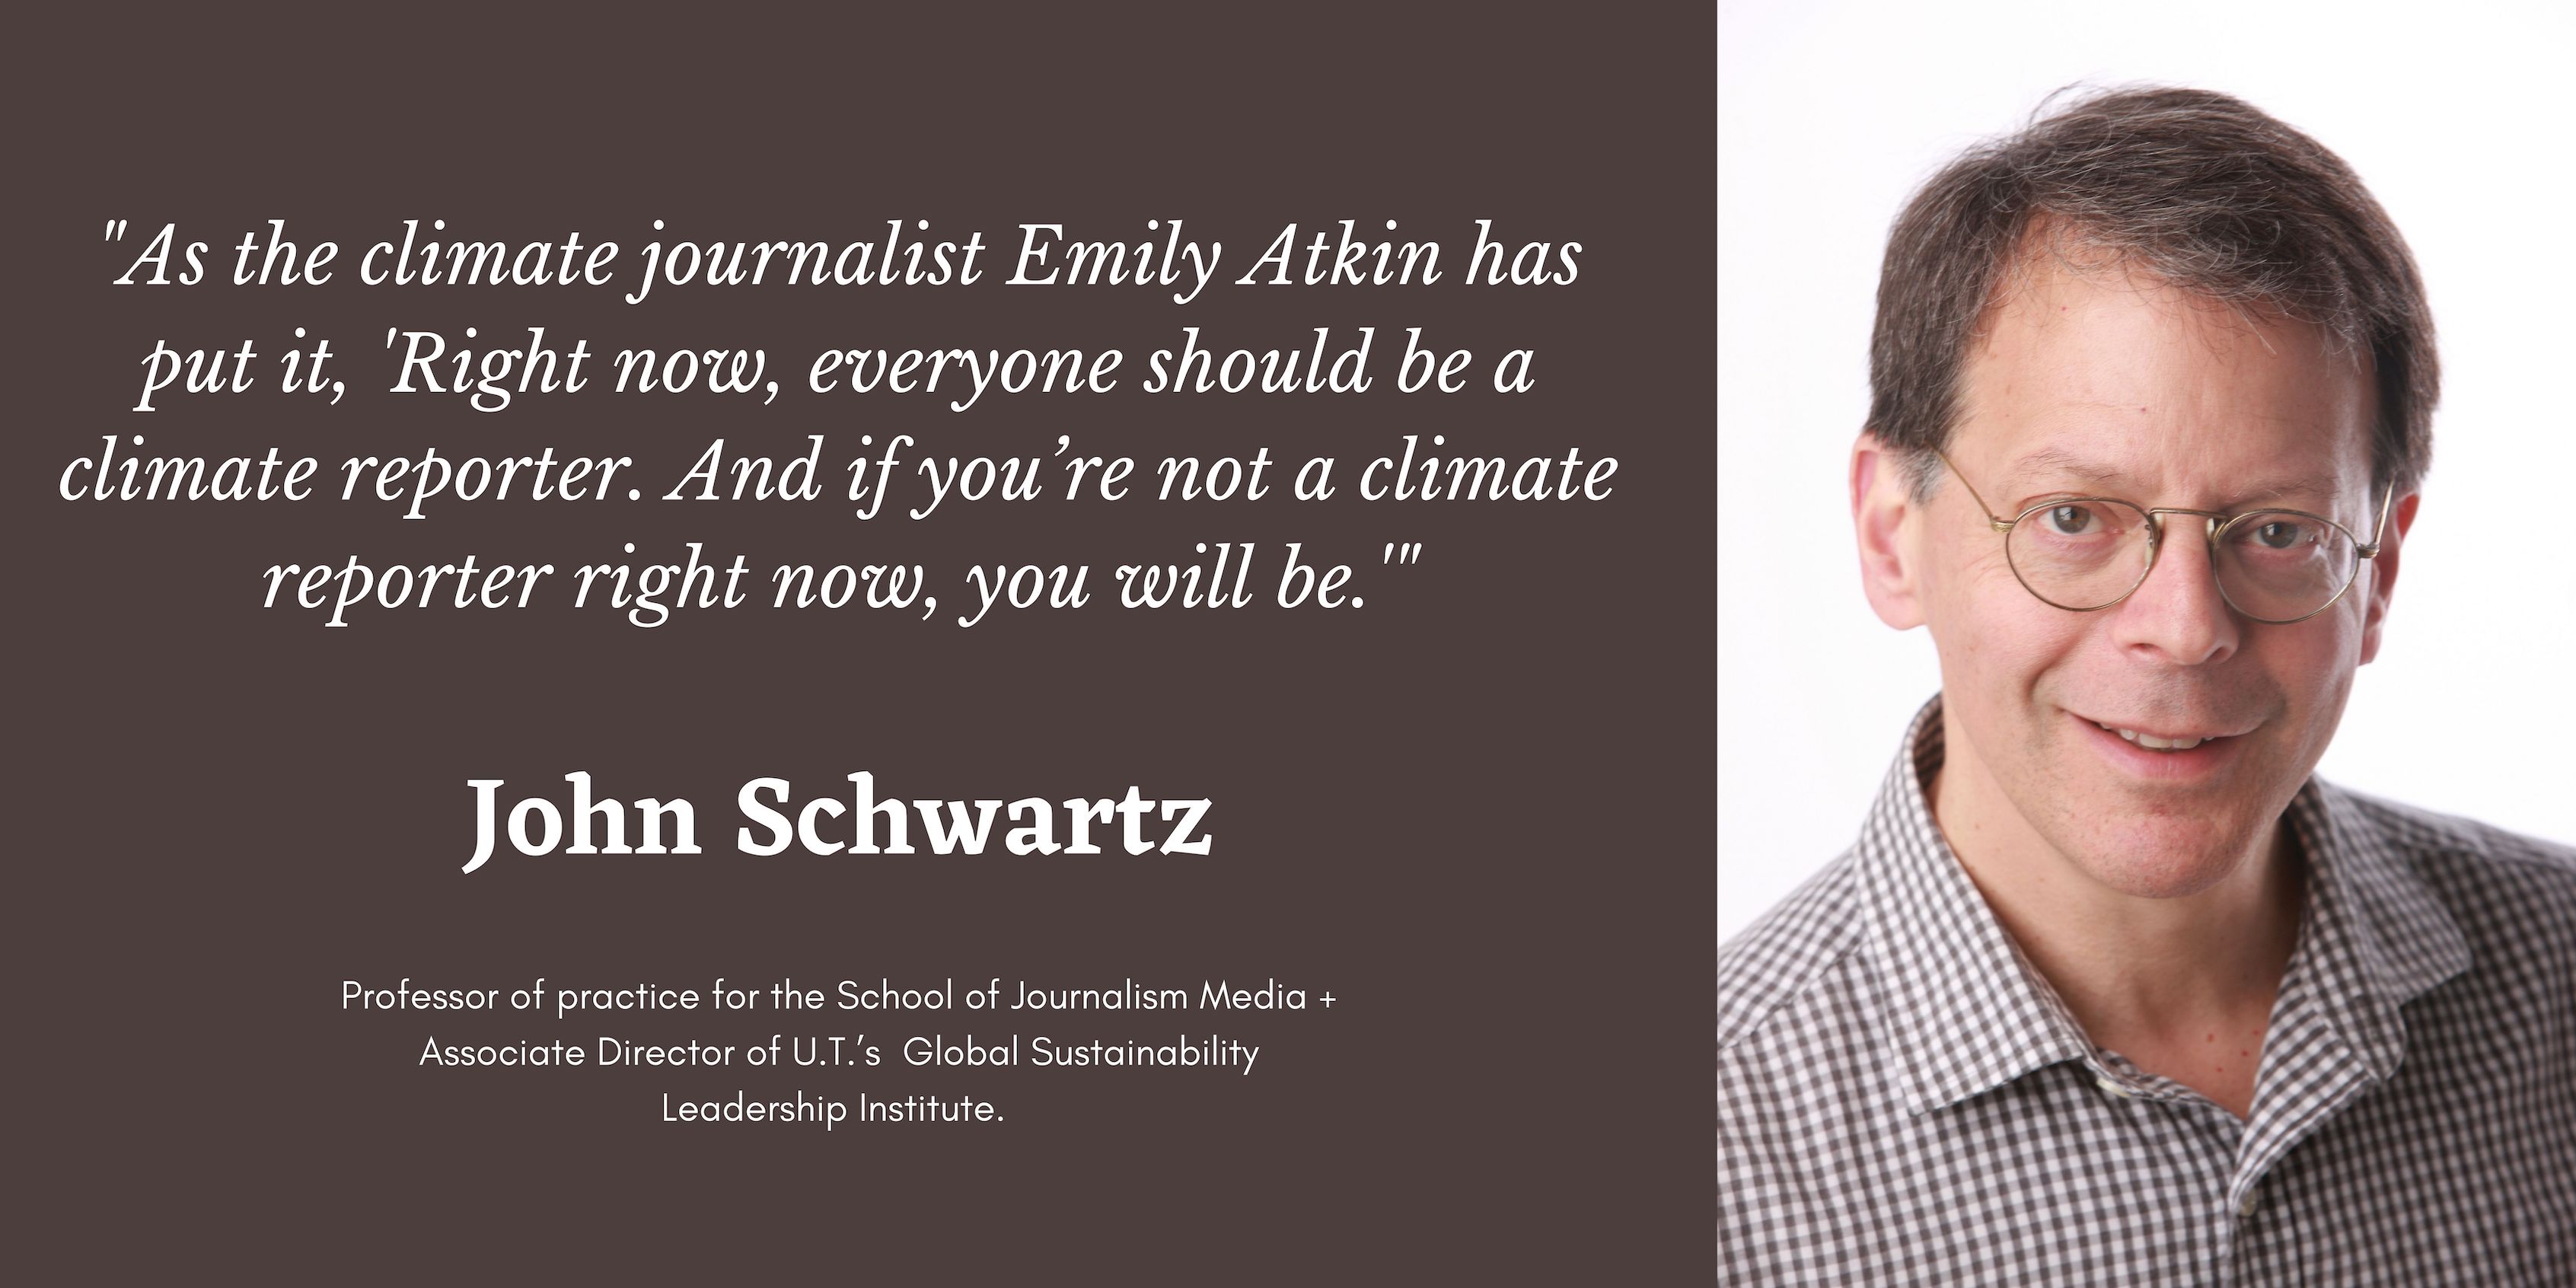 On the right is a photo of John Schwartz. On the right is a quote in white text that says, "As the climate journalist Emily Atkin has put it, “right now, everyone should be a climate reporter. And if you’re not a climate reporter right now, you will be.” Below is his name and position title.